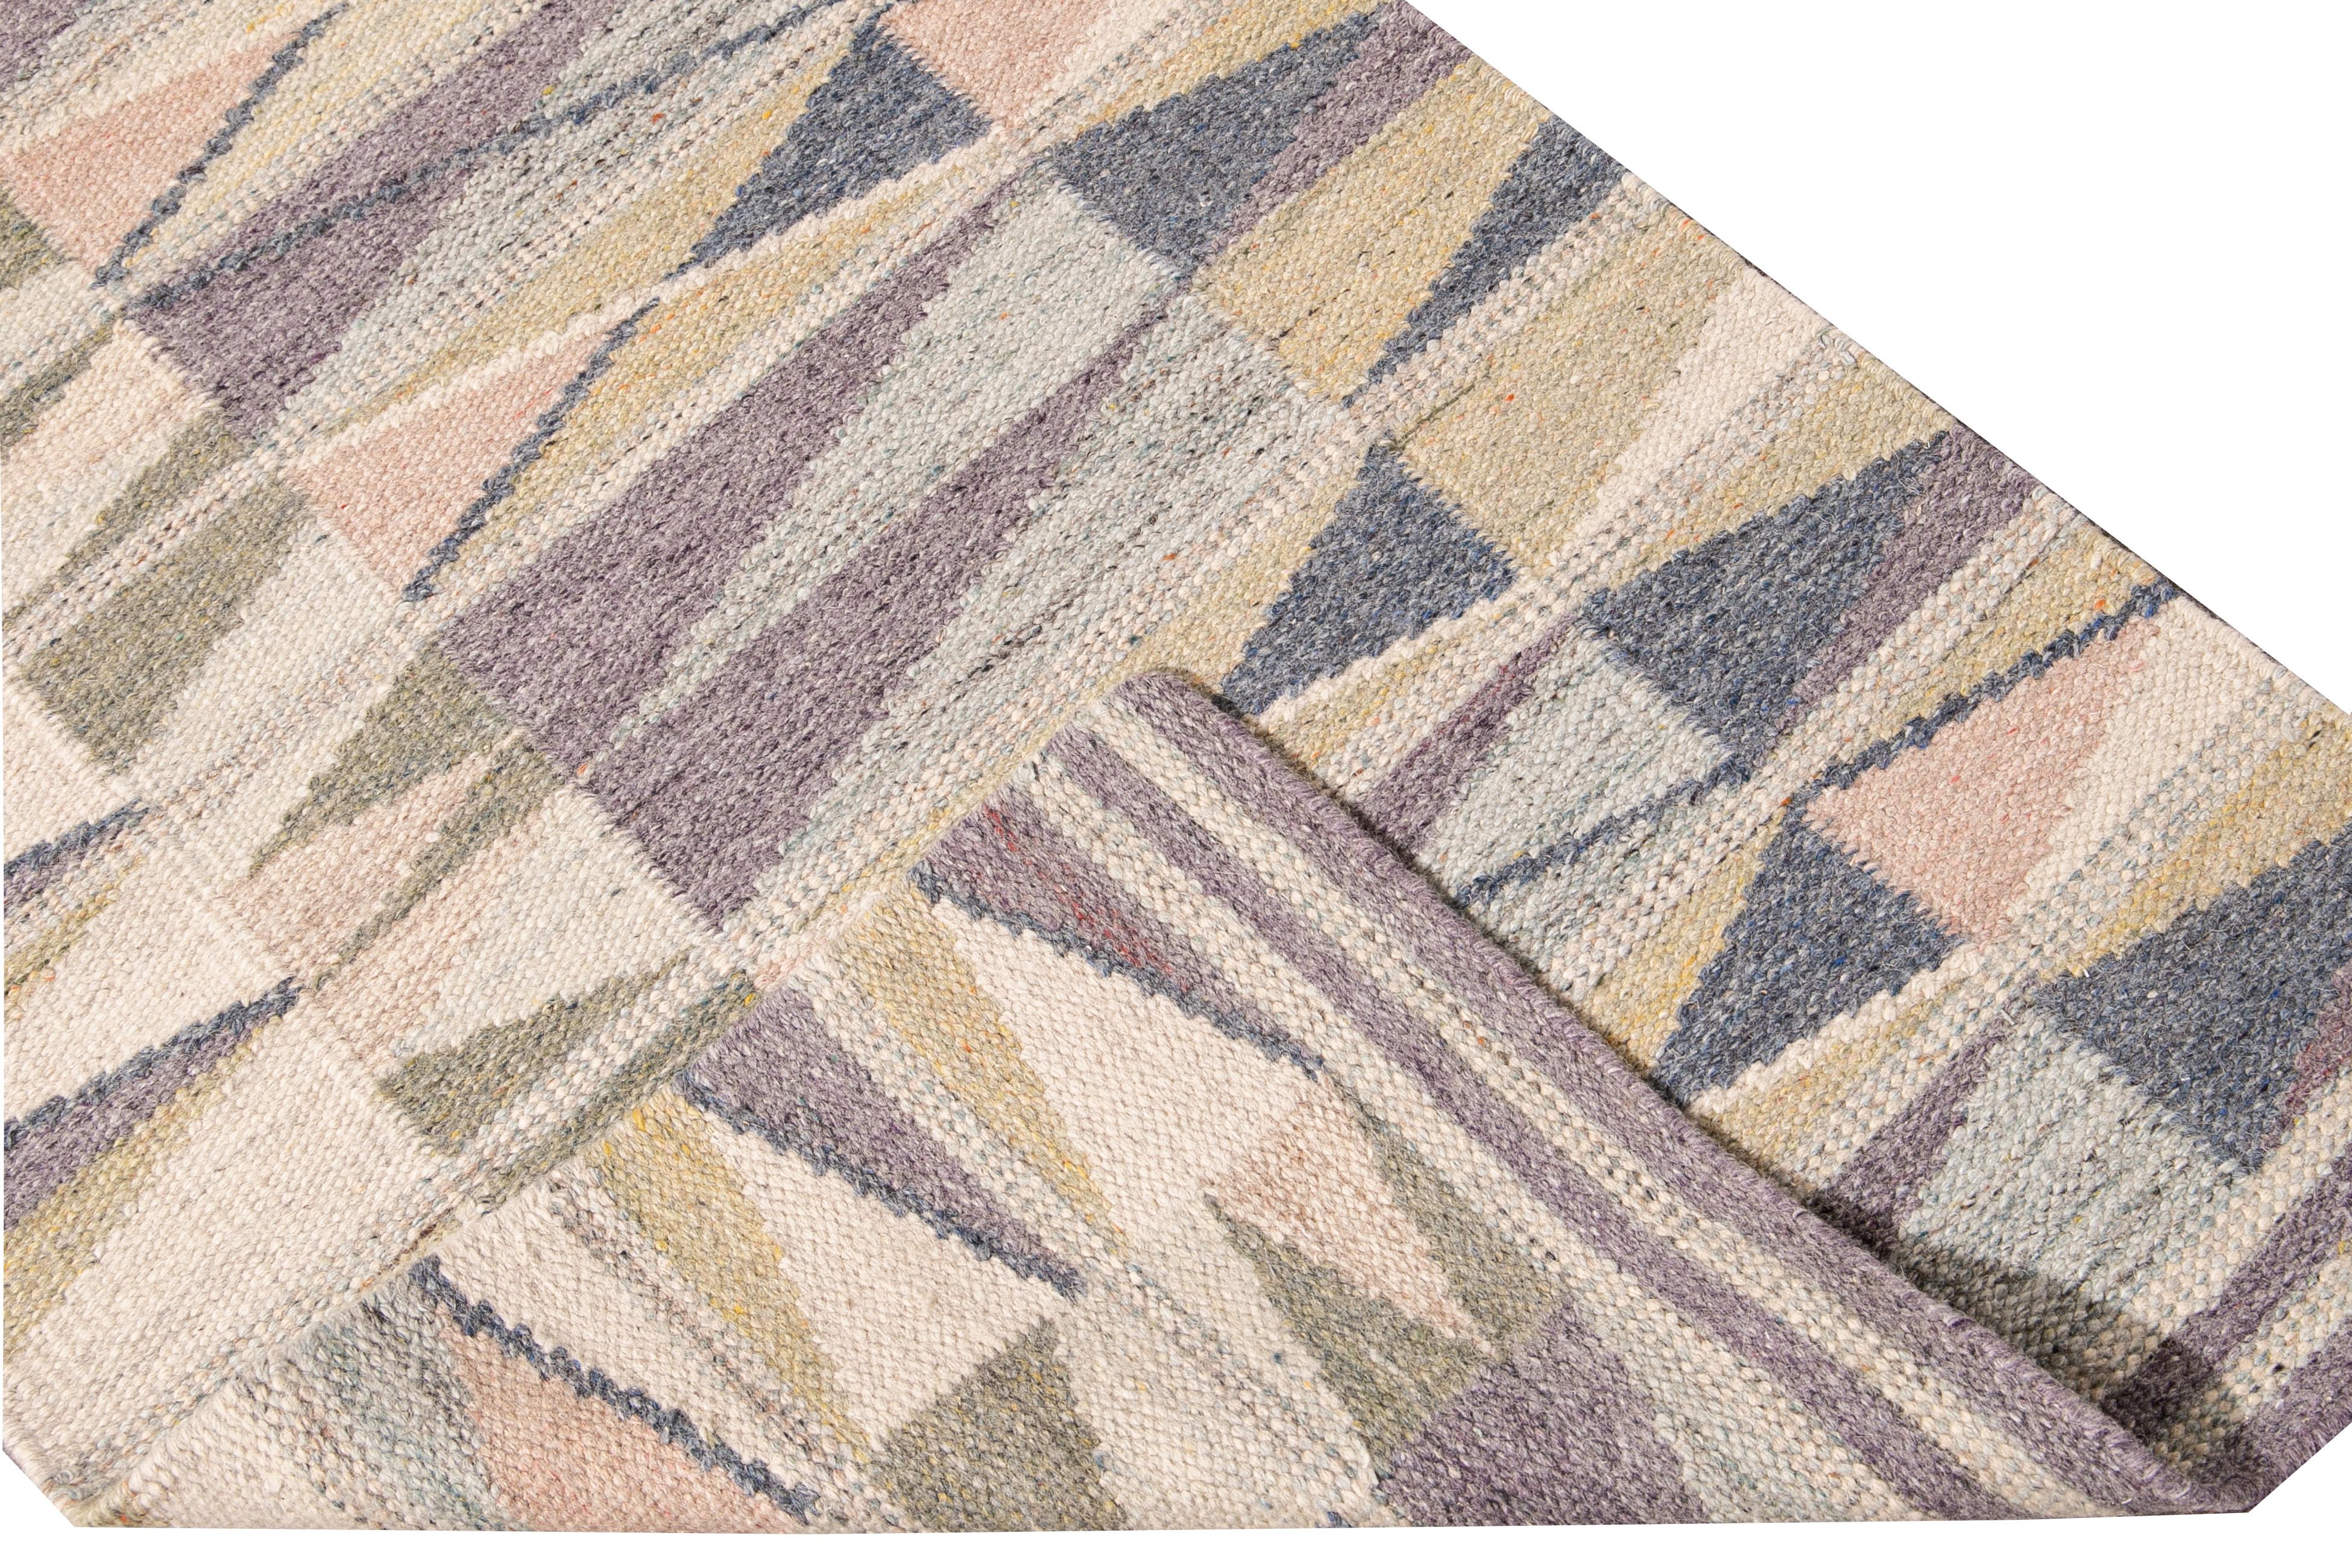 Beautiful modern Long Swedish hand-knotted wool runner with a beige field. This Swedish runner has accents of peach, green, and purple in an all-over geometric abstract design.

This rug measures: 3'2